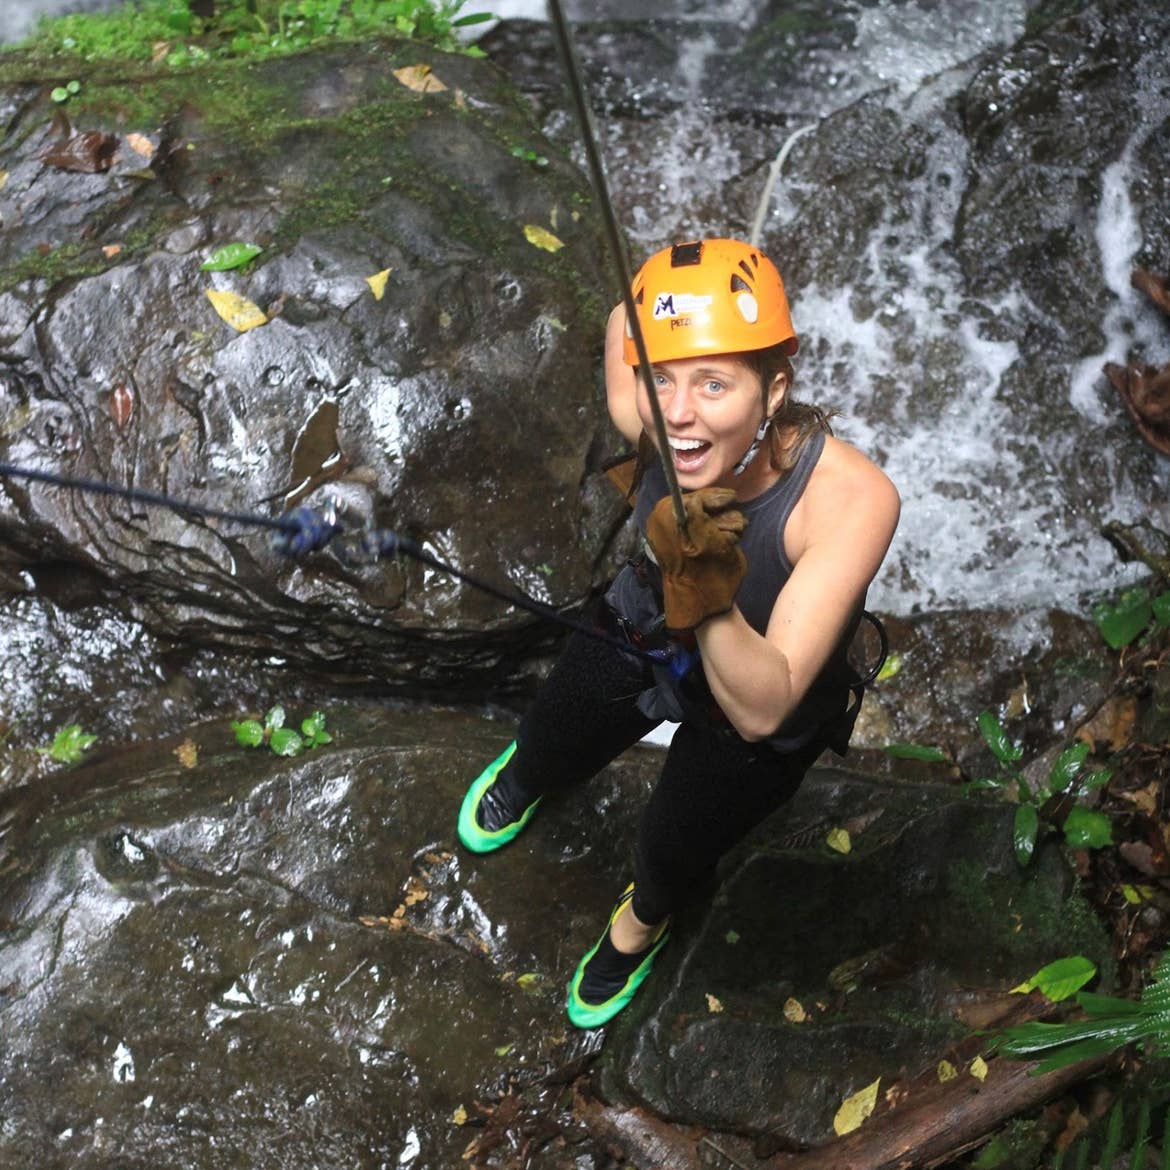 Featured contributor, Tiffany smiles after rappelling down a waterfall in Costa Rica.